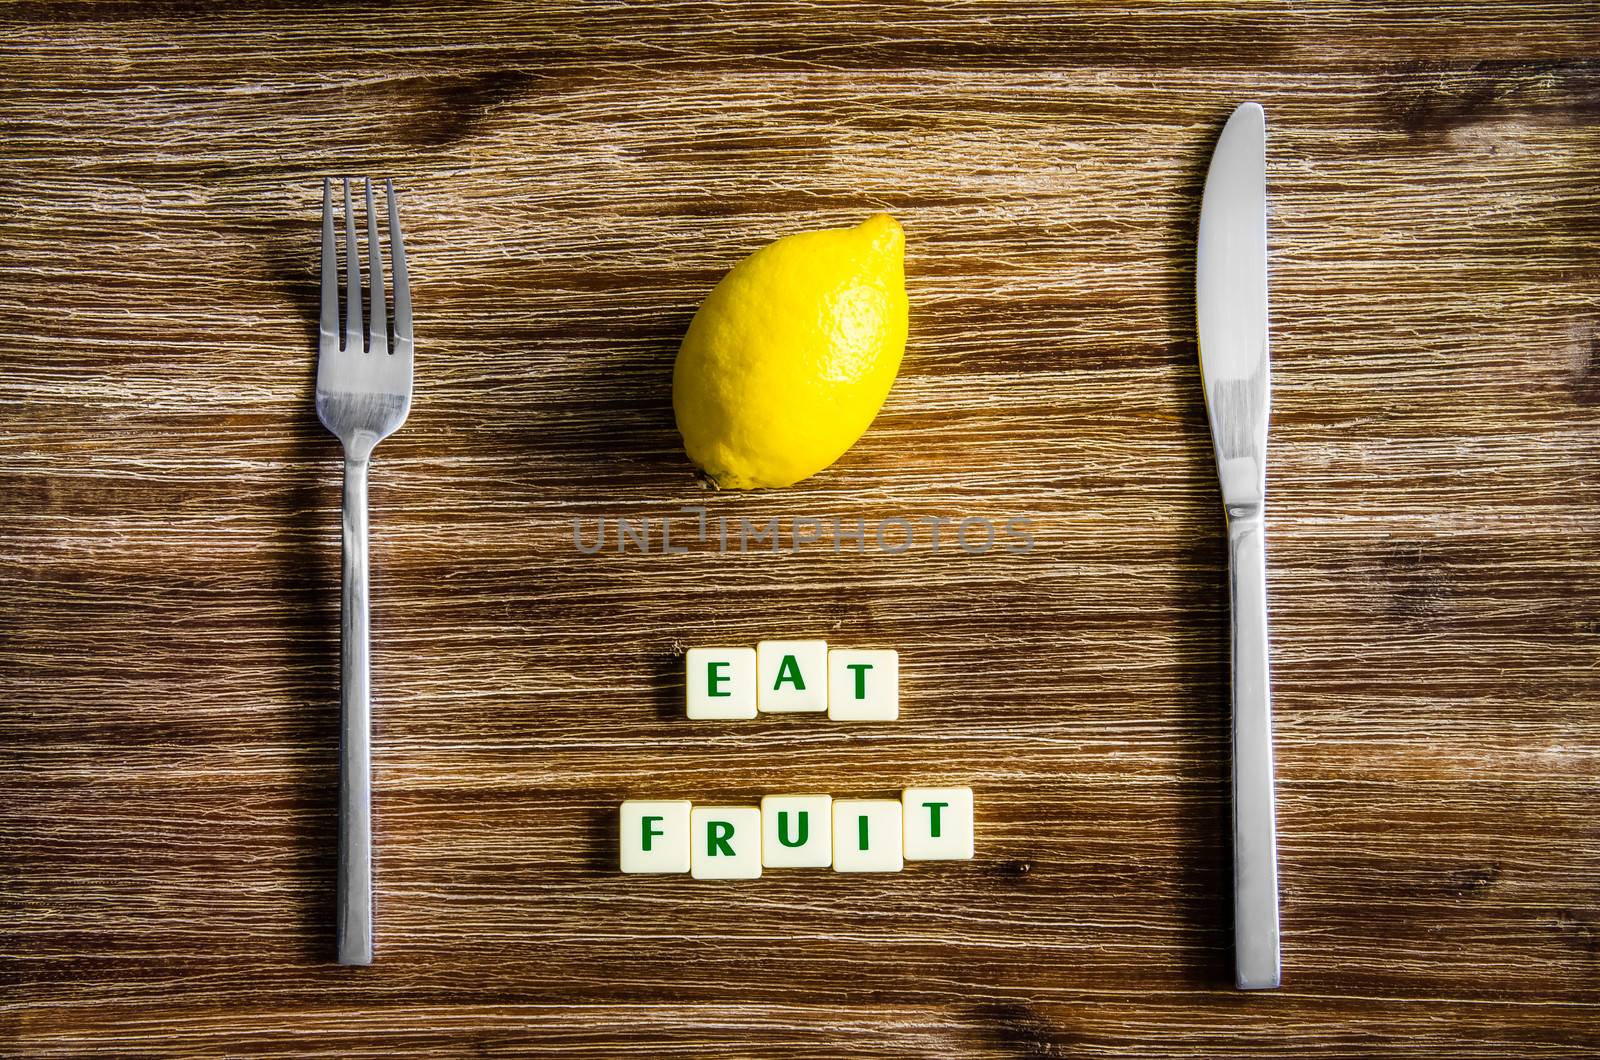 Silverware and lemon on wooden table with sign Eat fruit by martinm303